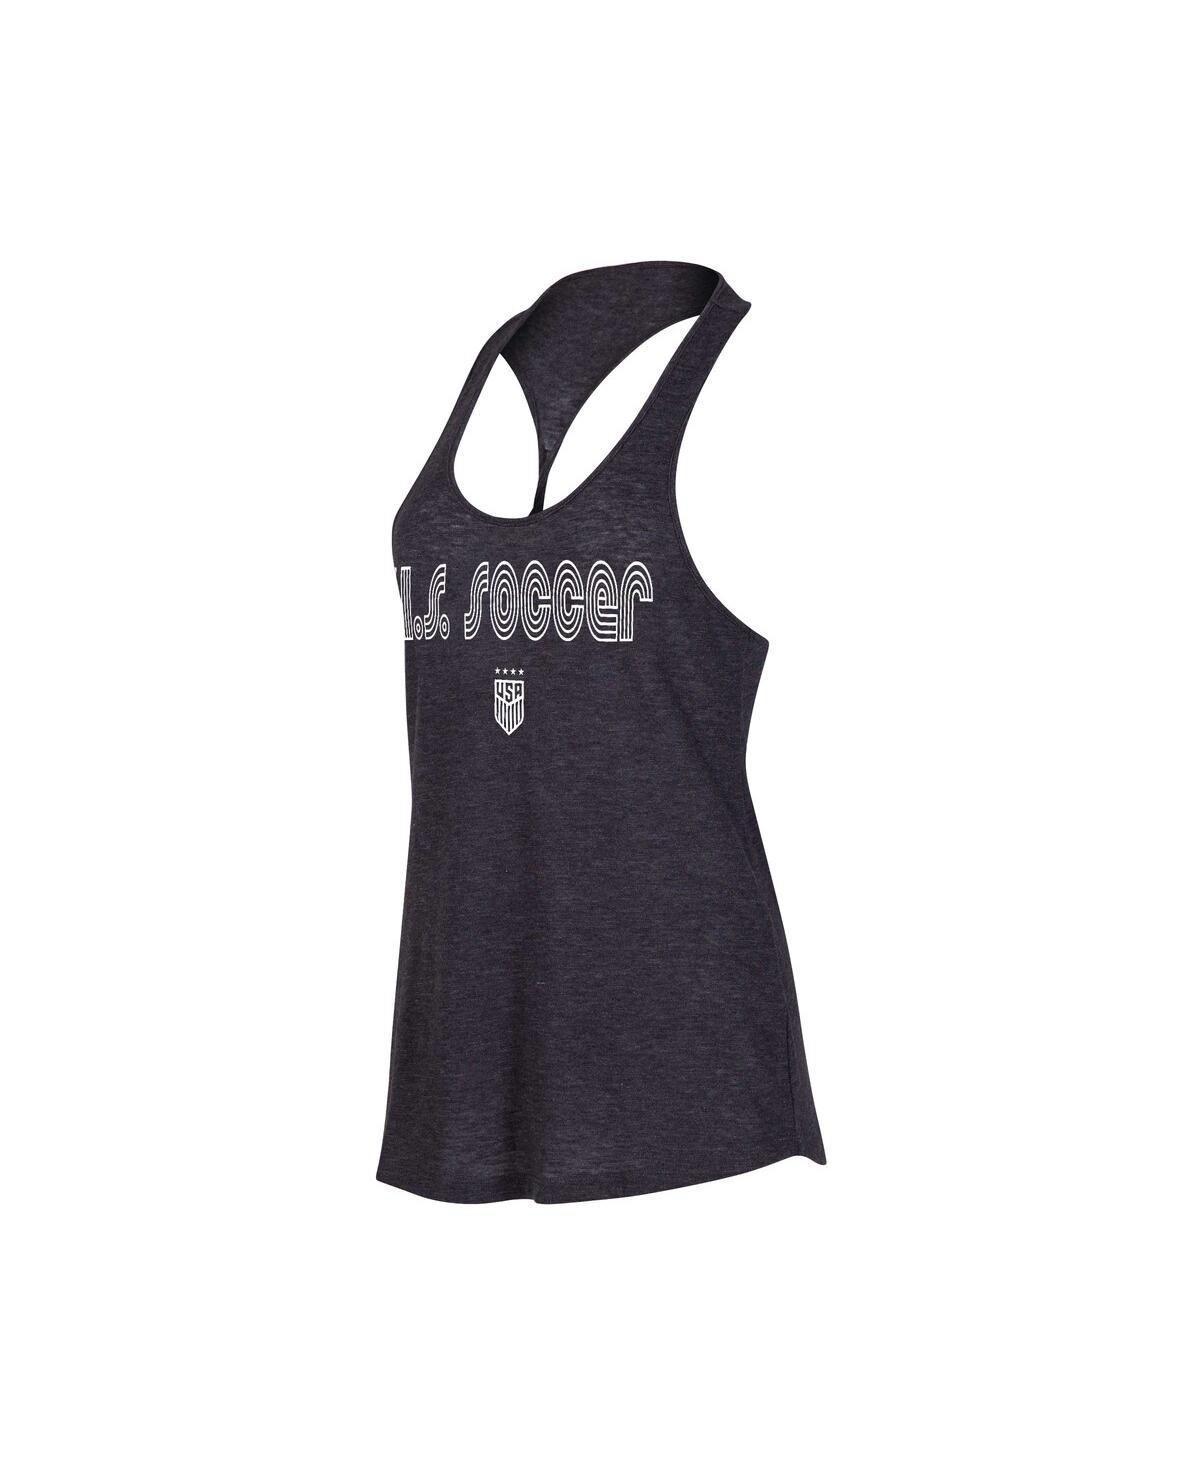 Women's Concepts Sport Heather Charcoal Uswnt Radiant Twist Back Scoop Neck Tank Top - Heather Charcoal